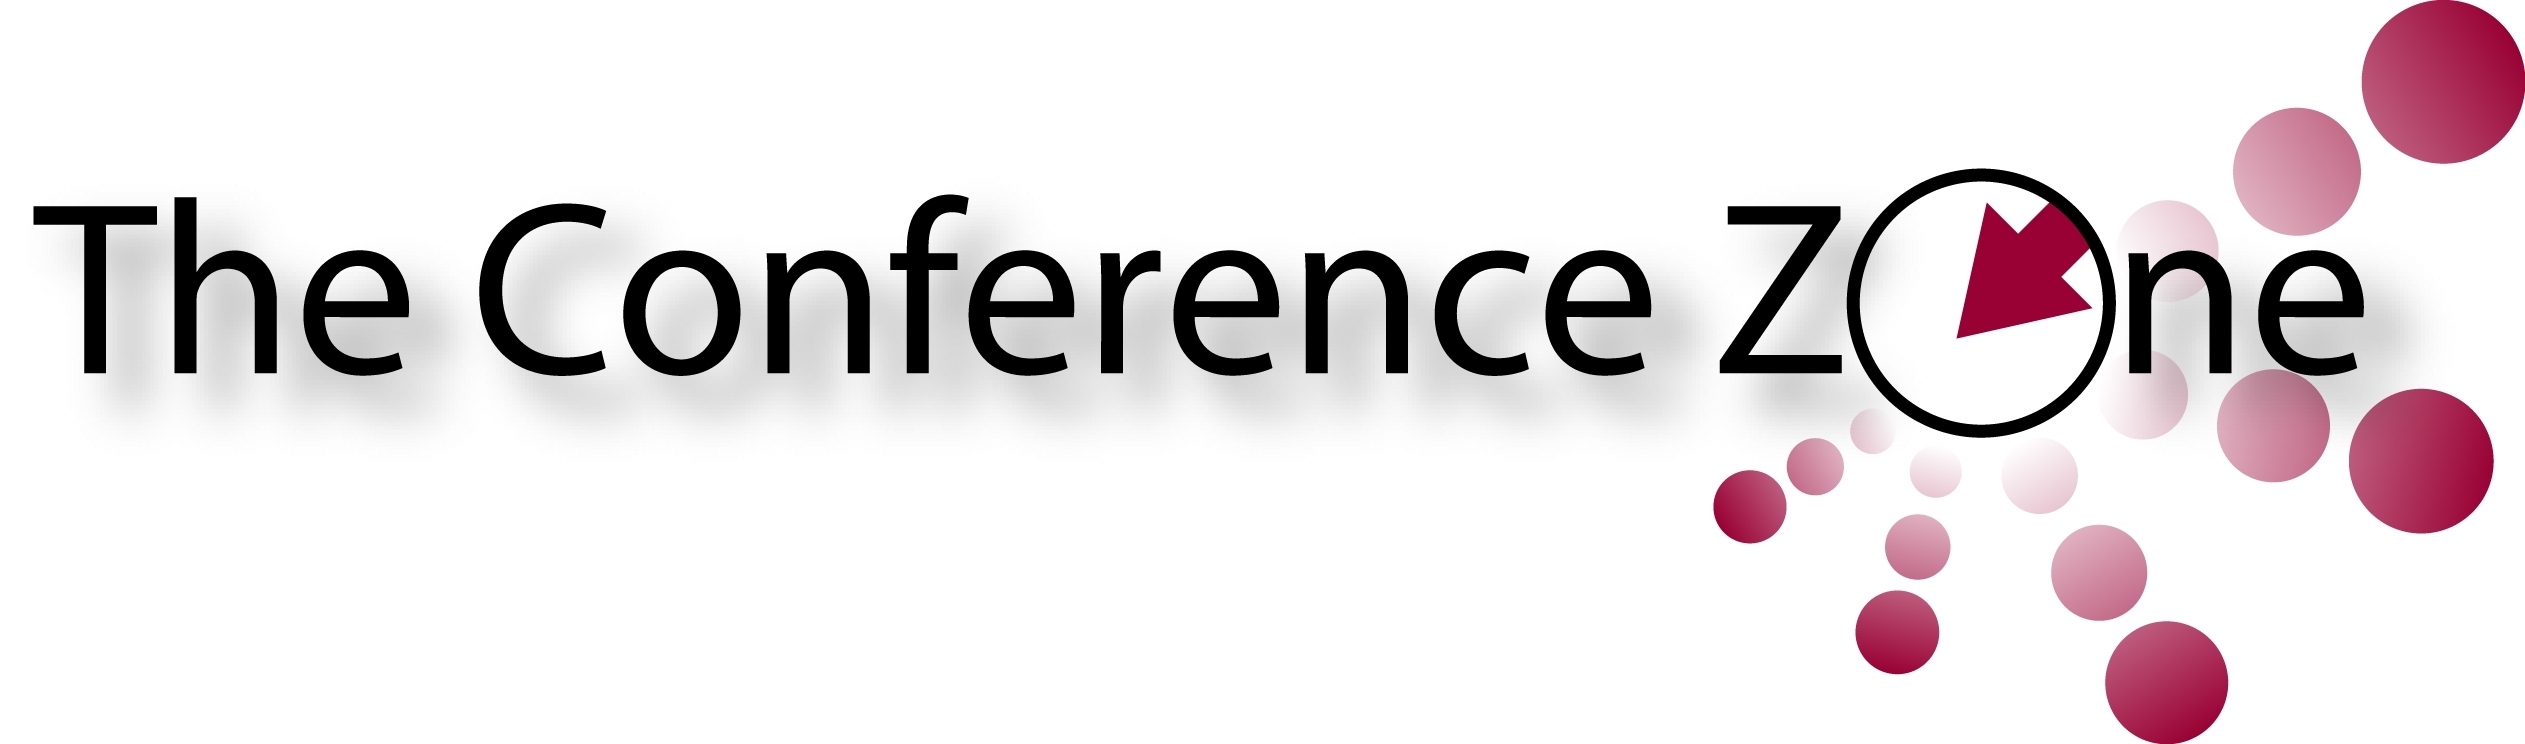 The Conference Zone logo